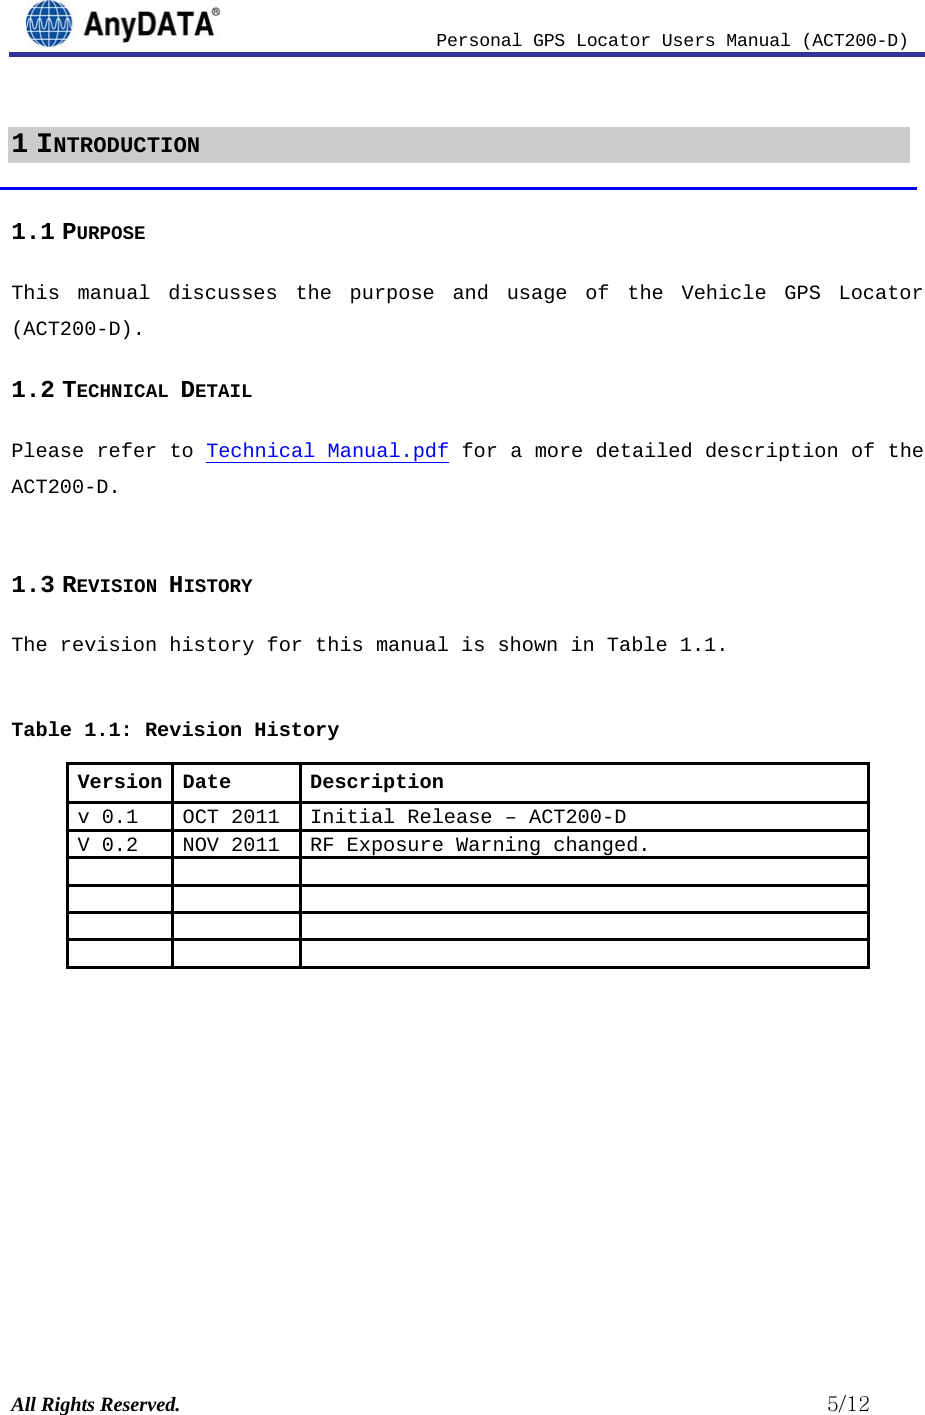                          Personal GPS Locator Users Manual (ACT200-D) All Rights Reserved.                                                          5/12 1 INTRODUCTION 1.1 PURPOSE This manual discusses the purpose and usage of the Vehicle GPS Locator (ACT200-D). 1.2 TECHNICAL DETAIL Please refer to Technical Manual.pdf for a more detailed description of the ACT200-D.  1.3 REVISION HISTORY The revision history for this manual is shown in Table 1.1.   Table 1.1: Revision History Version Date  Description v 0.1  OCT 2011  Initial Release –ACT200-DV 0.2  NOV 2011  RF Exposure Warning changed.                         